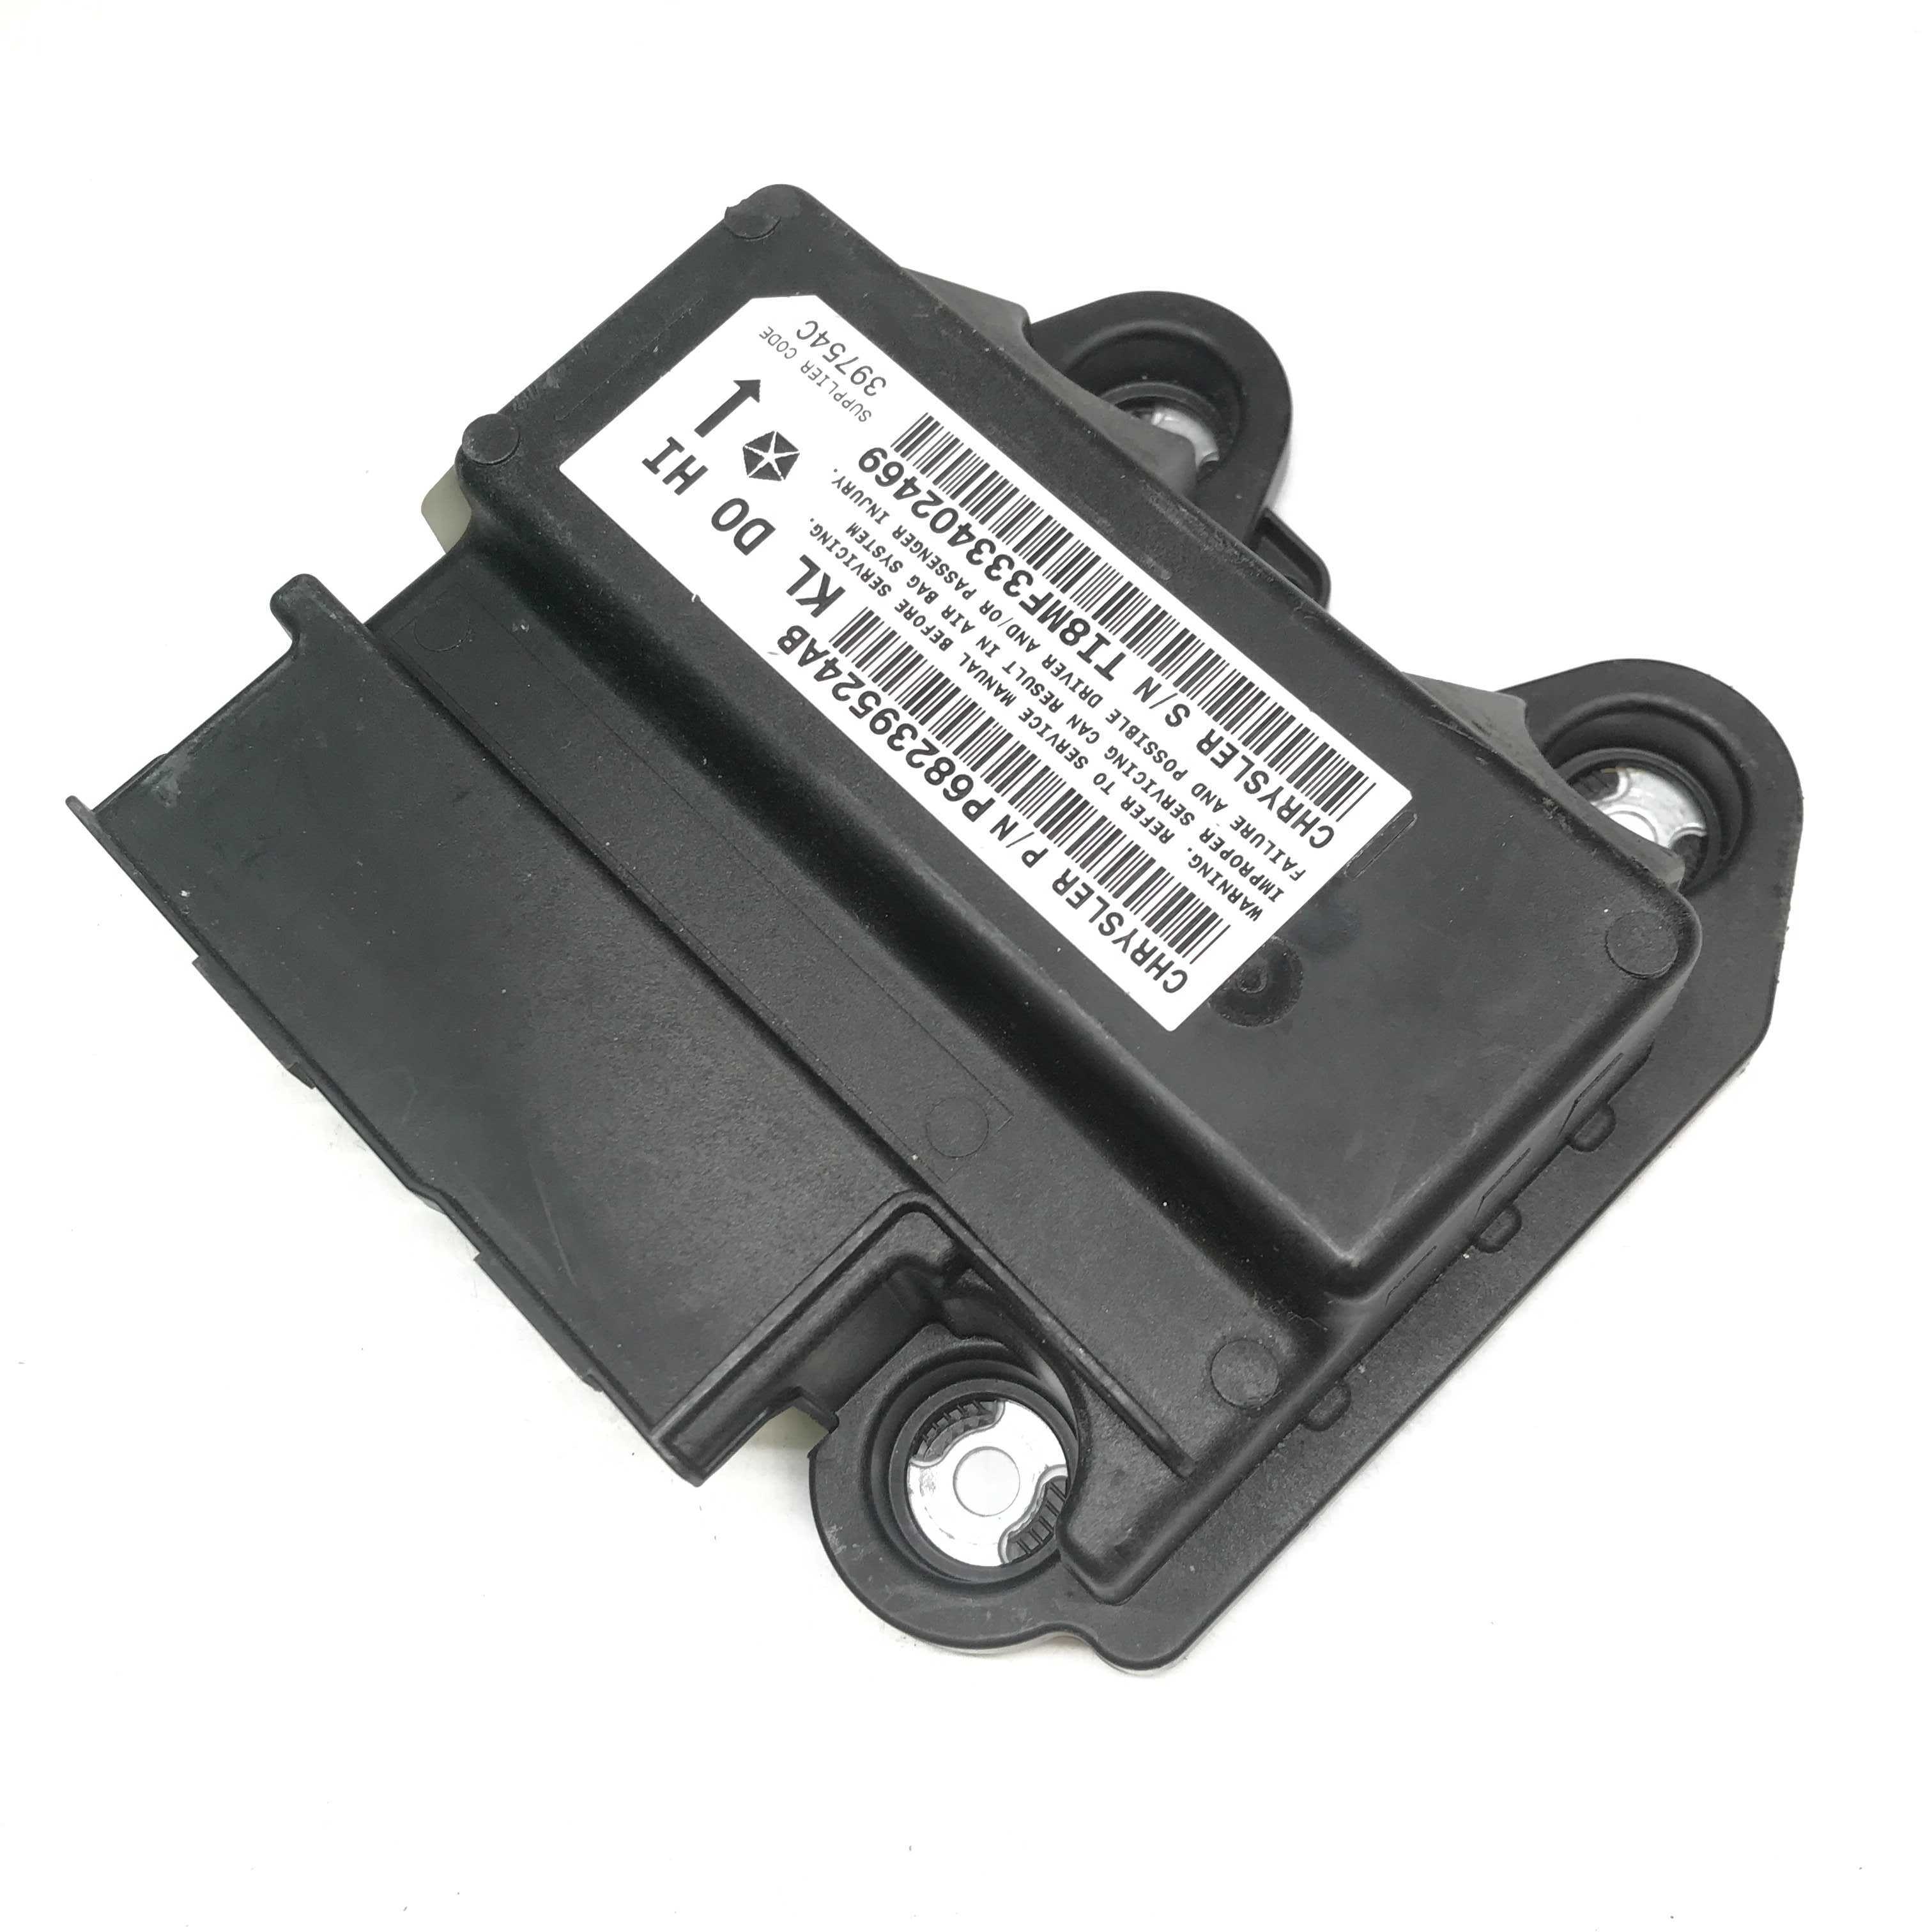 JEEP CHEROKEE SRS ORC ORM Occupant Control Module - Airbag Computer Control Module PART #P68239524AB